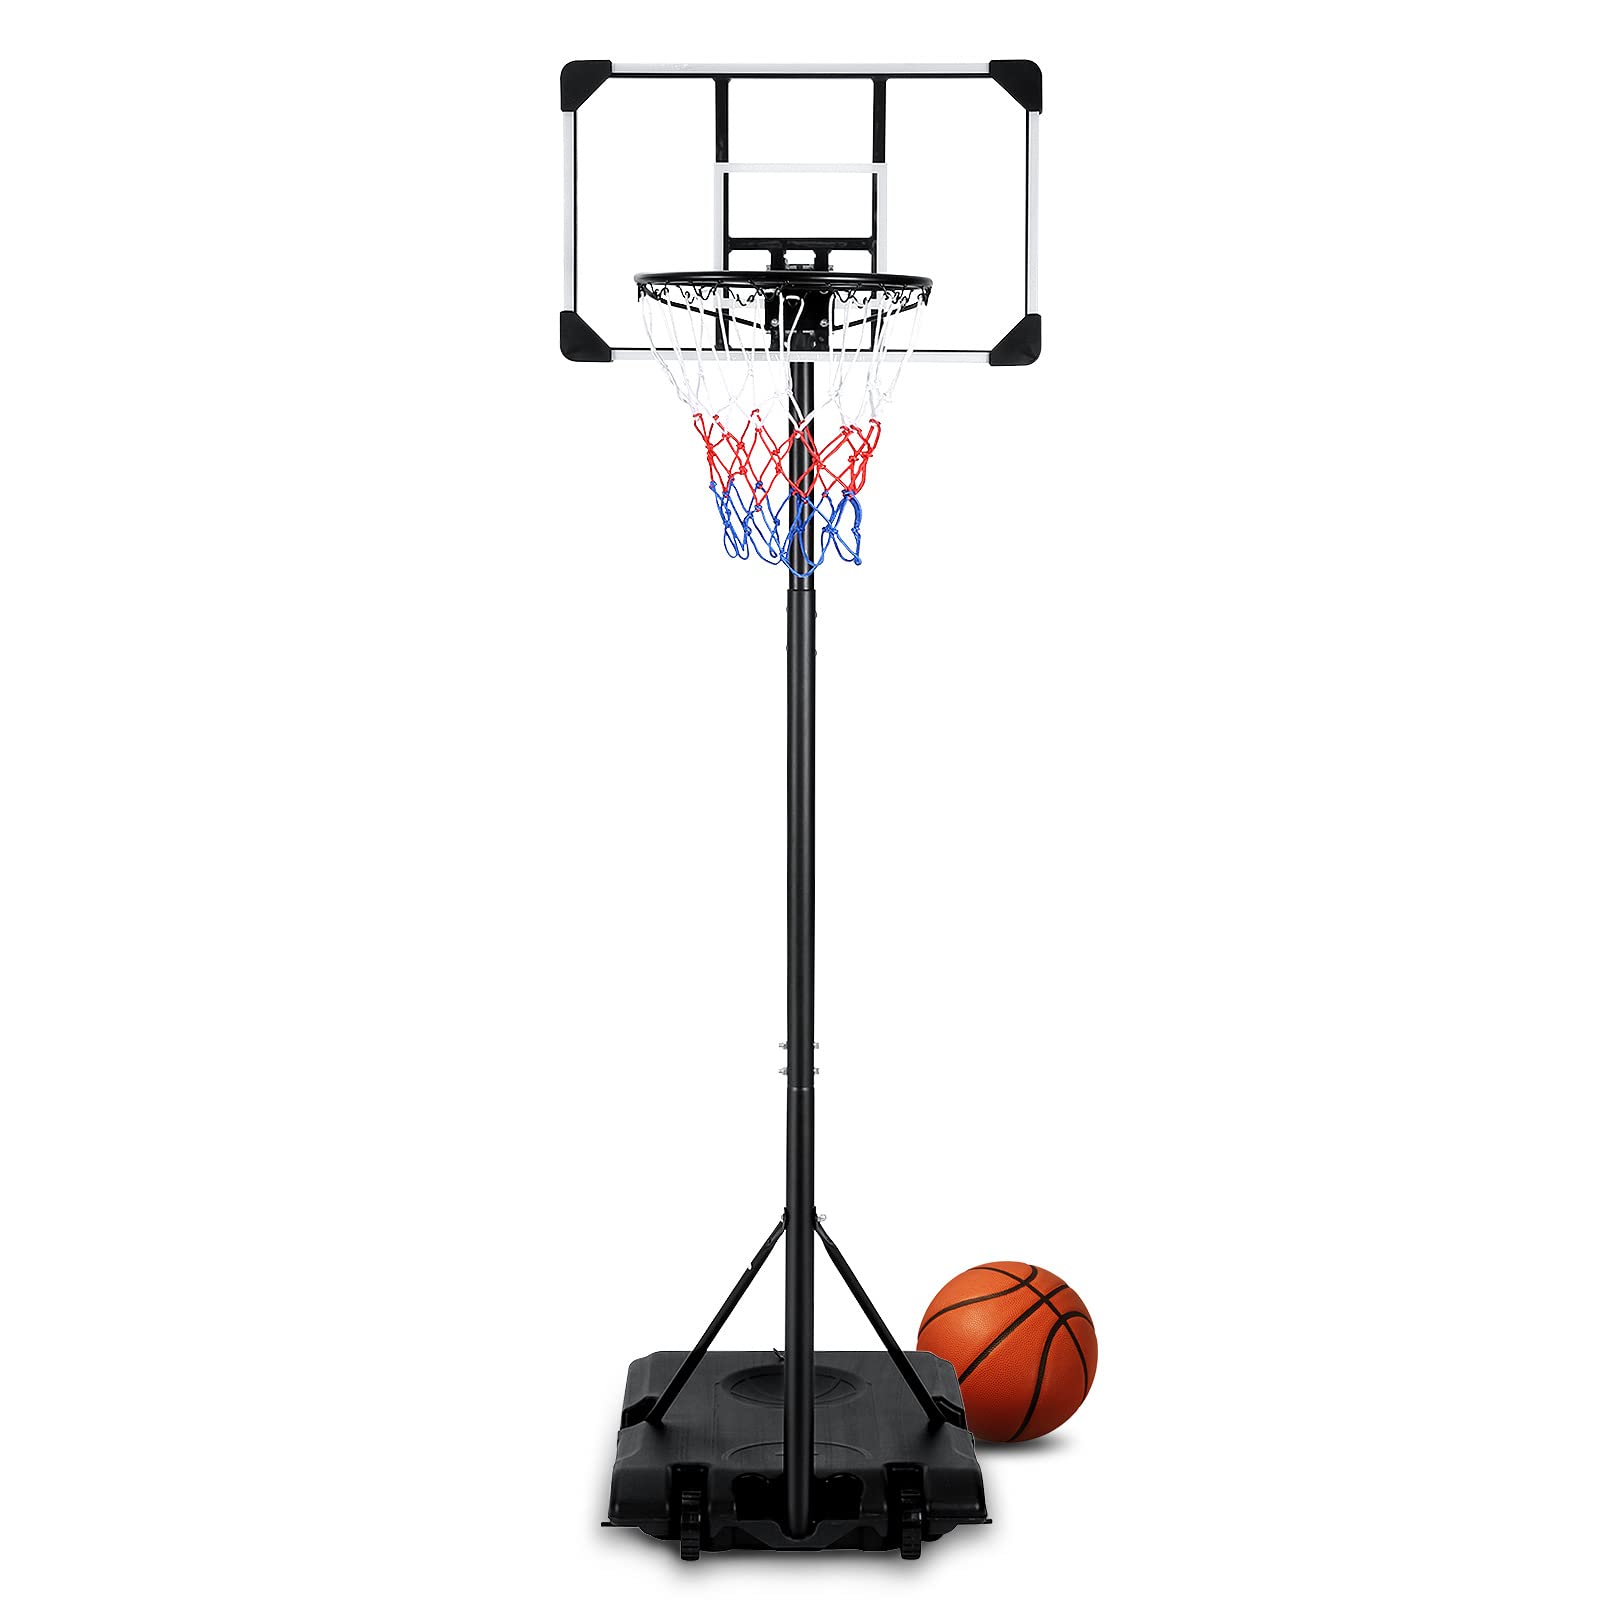 28Inch Basketball Hoop Goal Basketball System Stand Height Adjustable 7ft6in-10ft/5.8ft-7ft with PE Backboard Wheels Basketball Equipment for Youth Indoor Outdoor Use